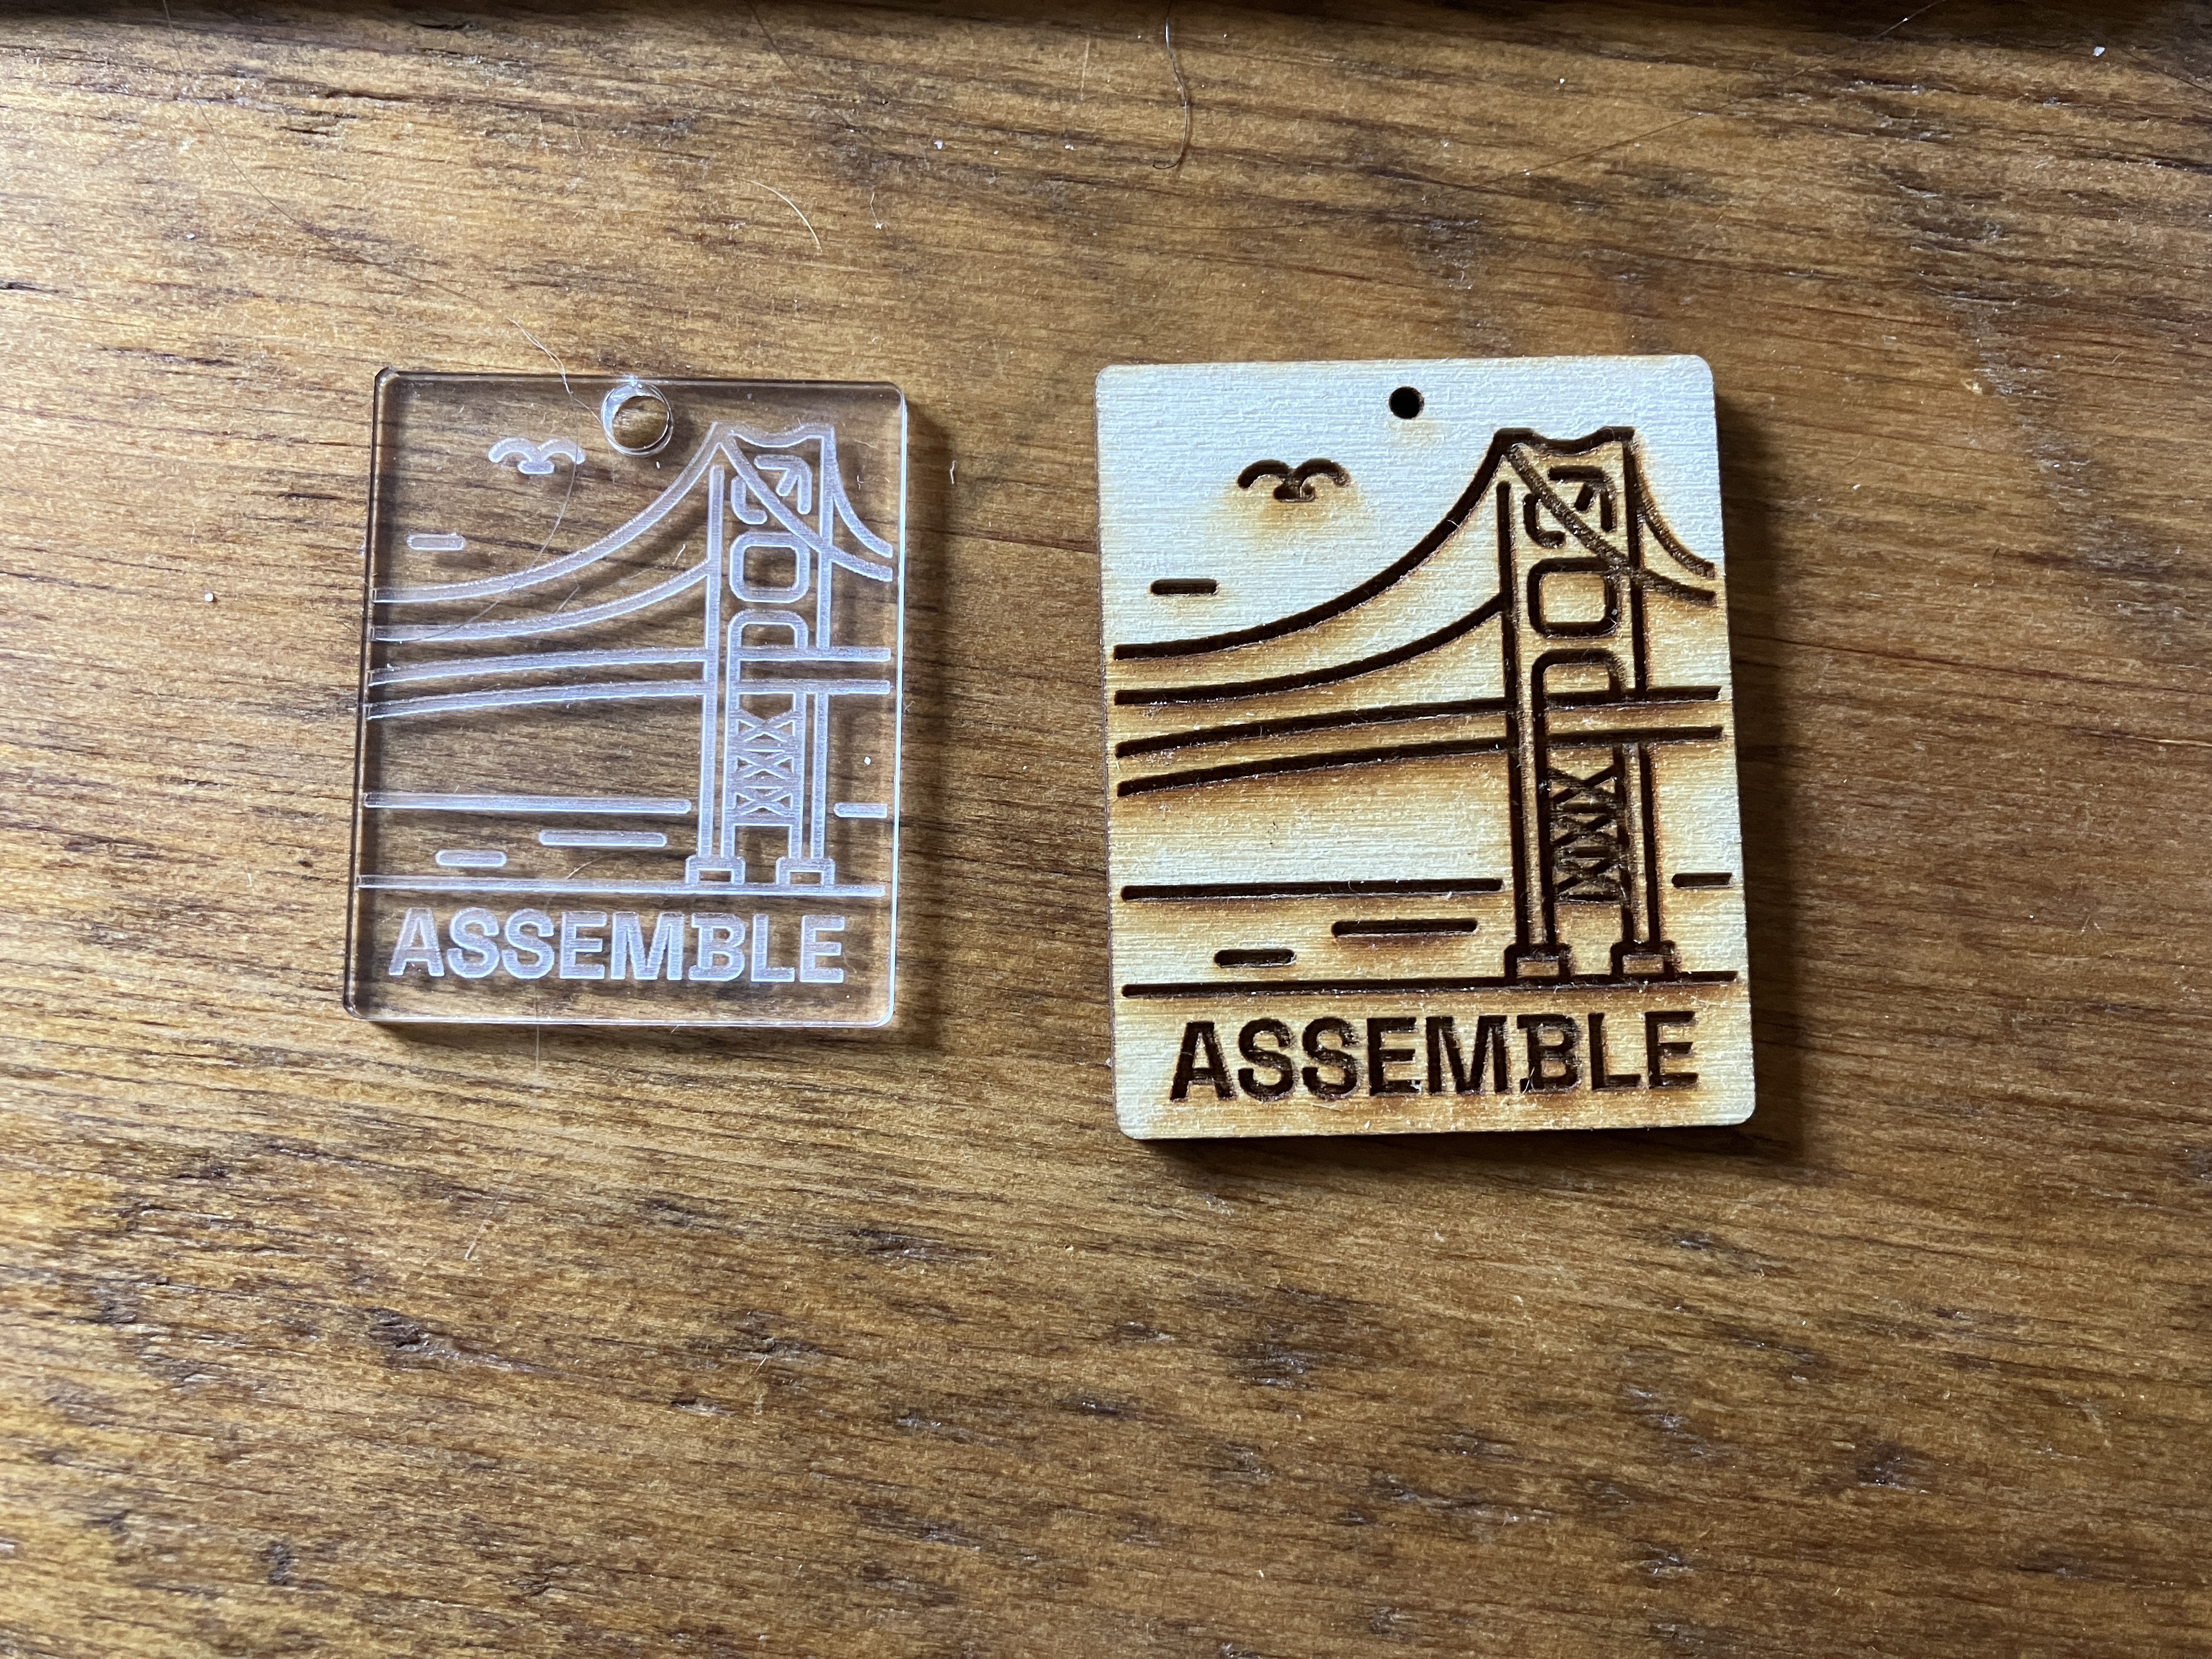 Two rectangular pieces laying flat on a wooden table engraved with the Assemble logo. The left piece is made with transparent plastic, and the piece on the right is wood.